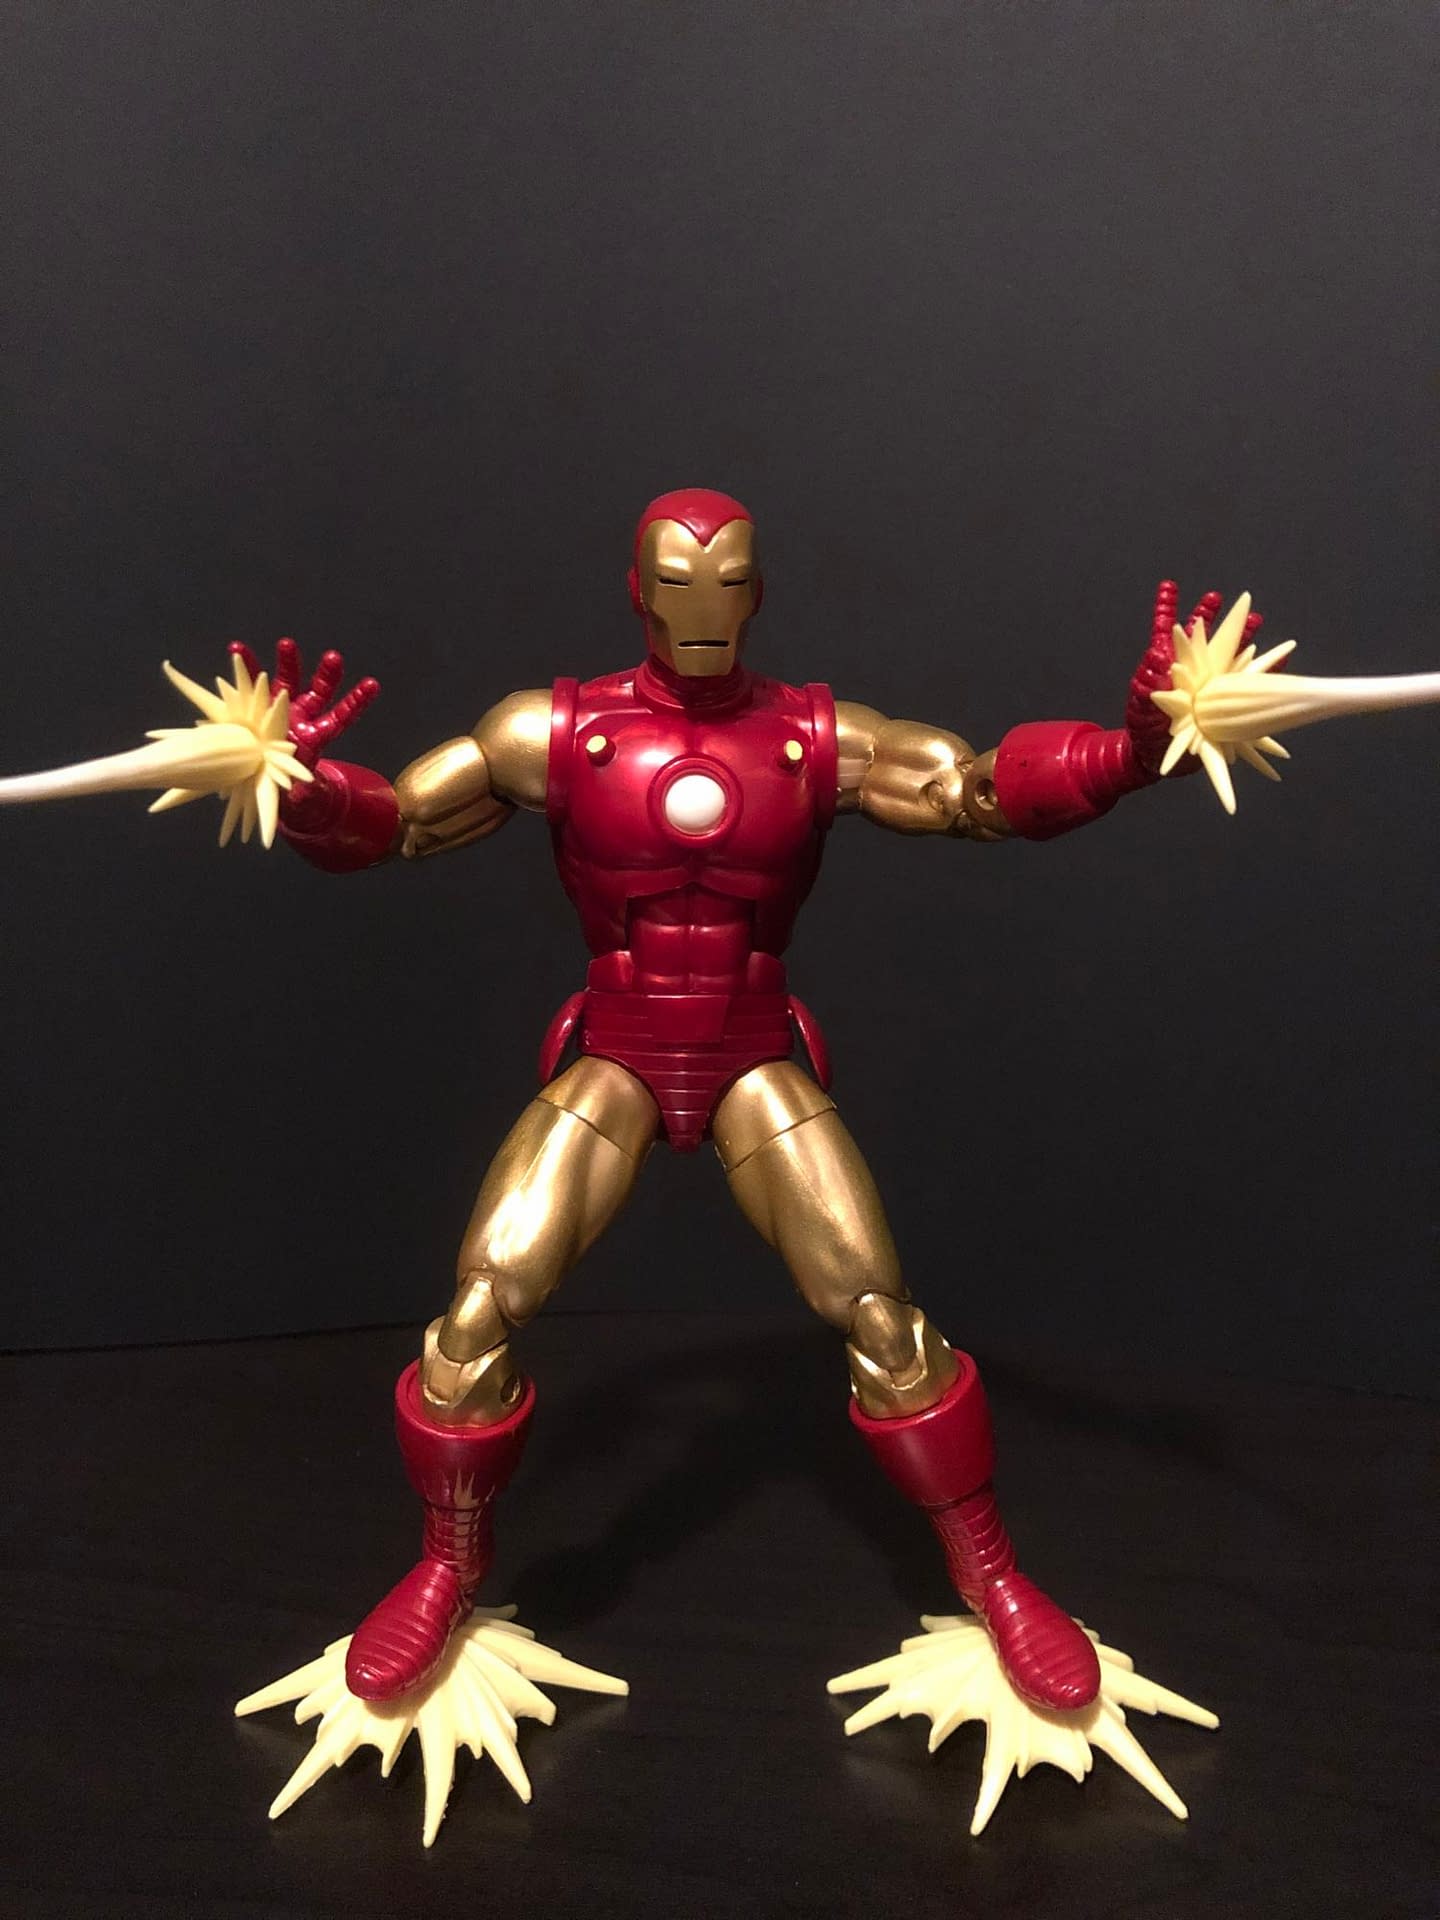 Marvel’s 80th Anniversary Iron Man Marvel Legends Figure [REVIEW]